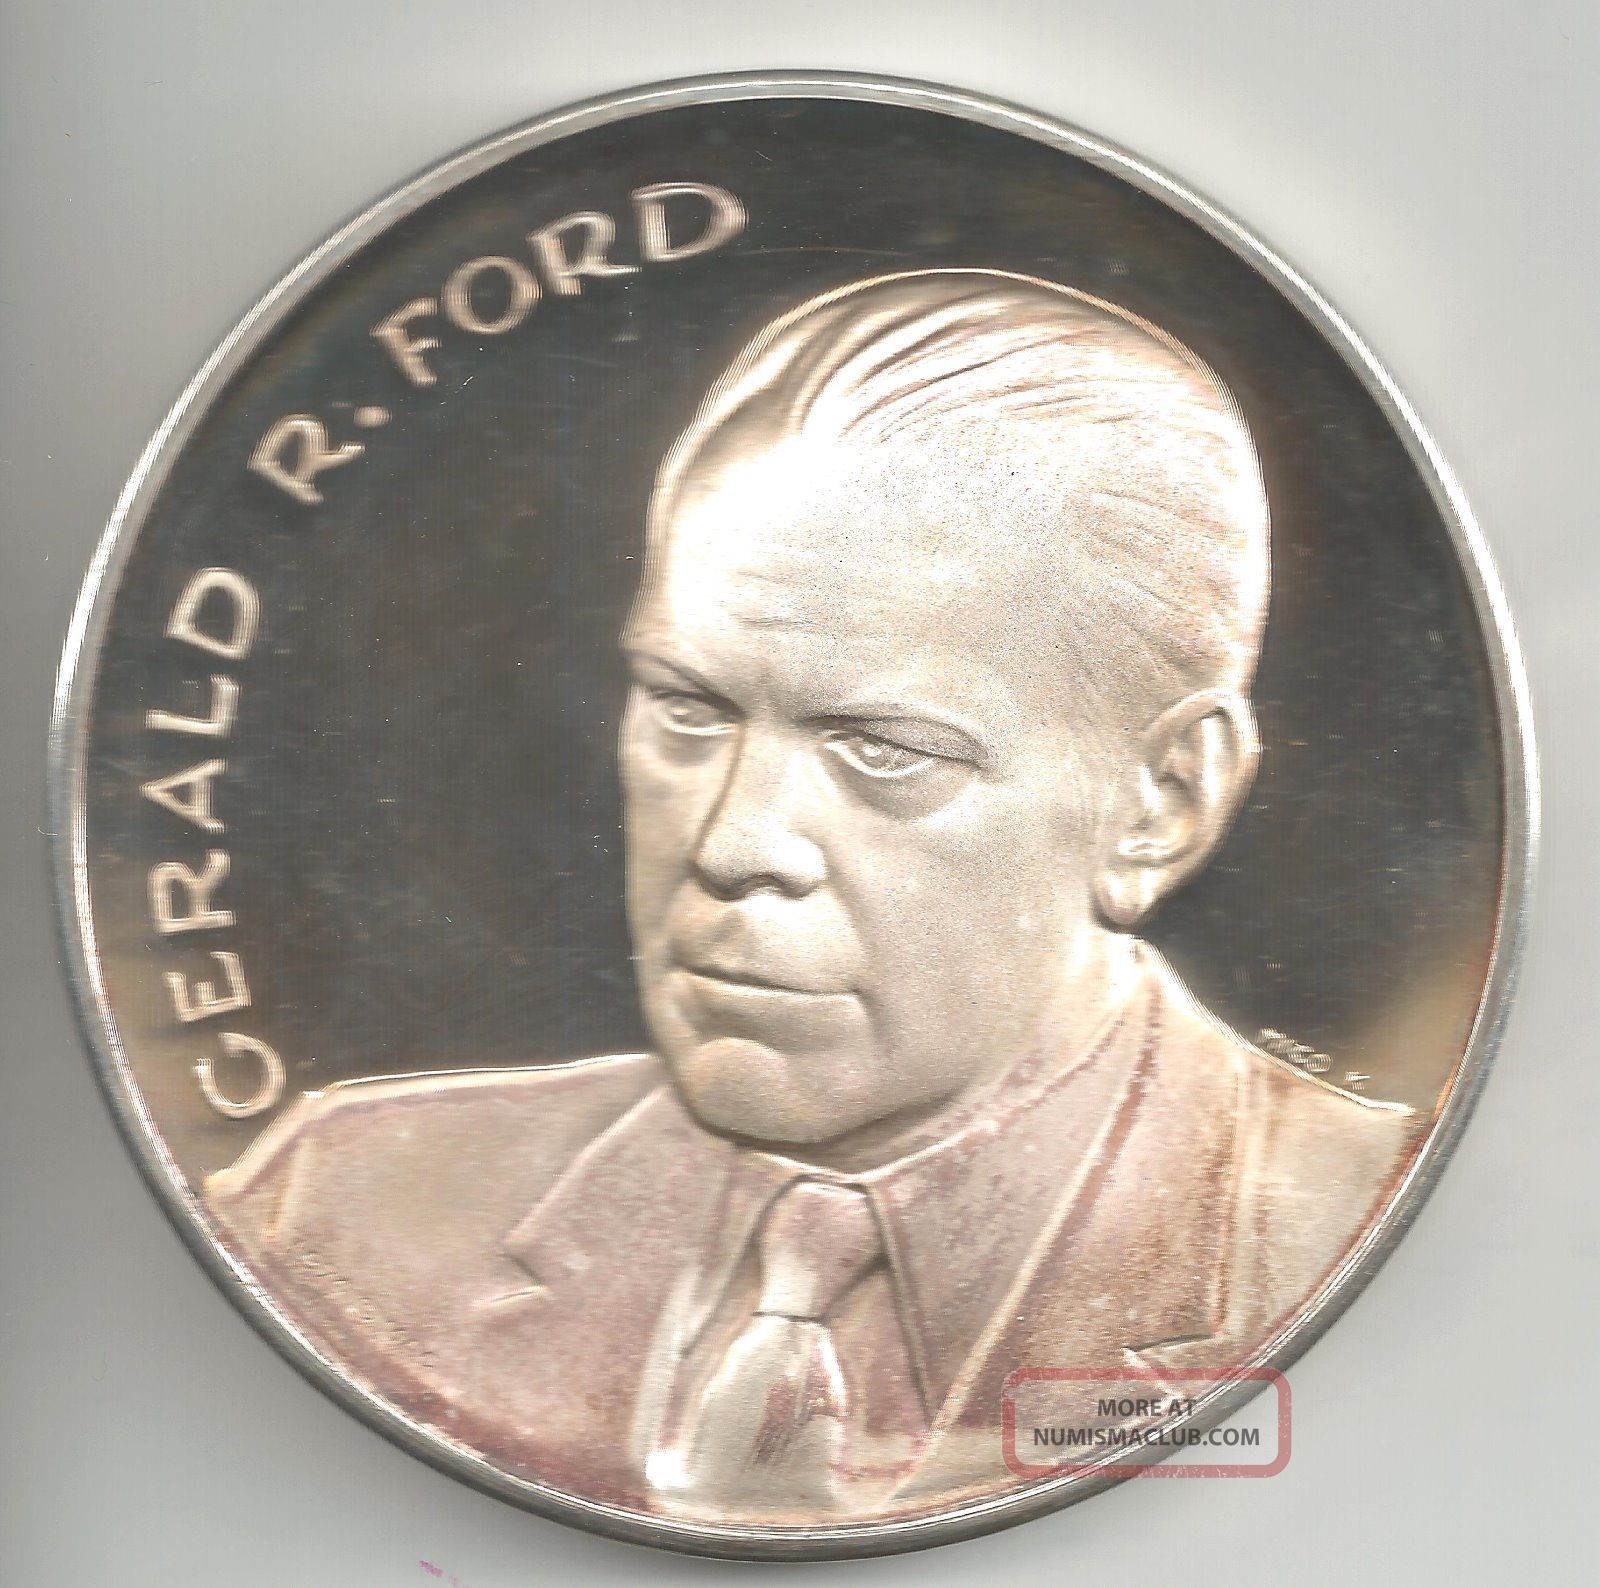 Gerald ford inauguration coin #5